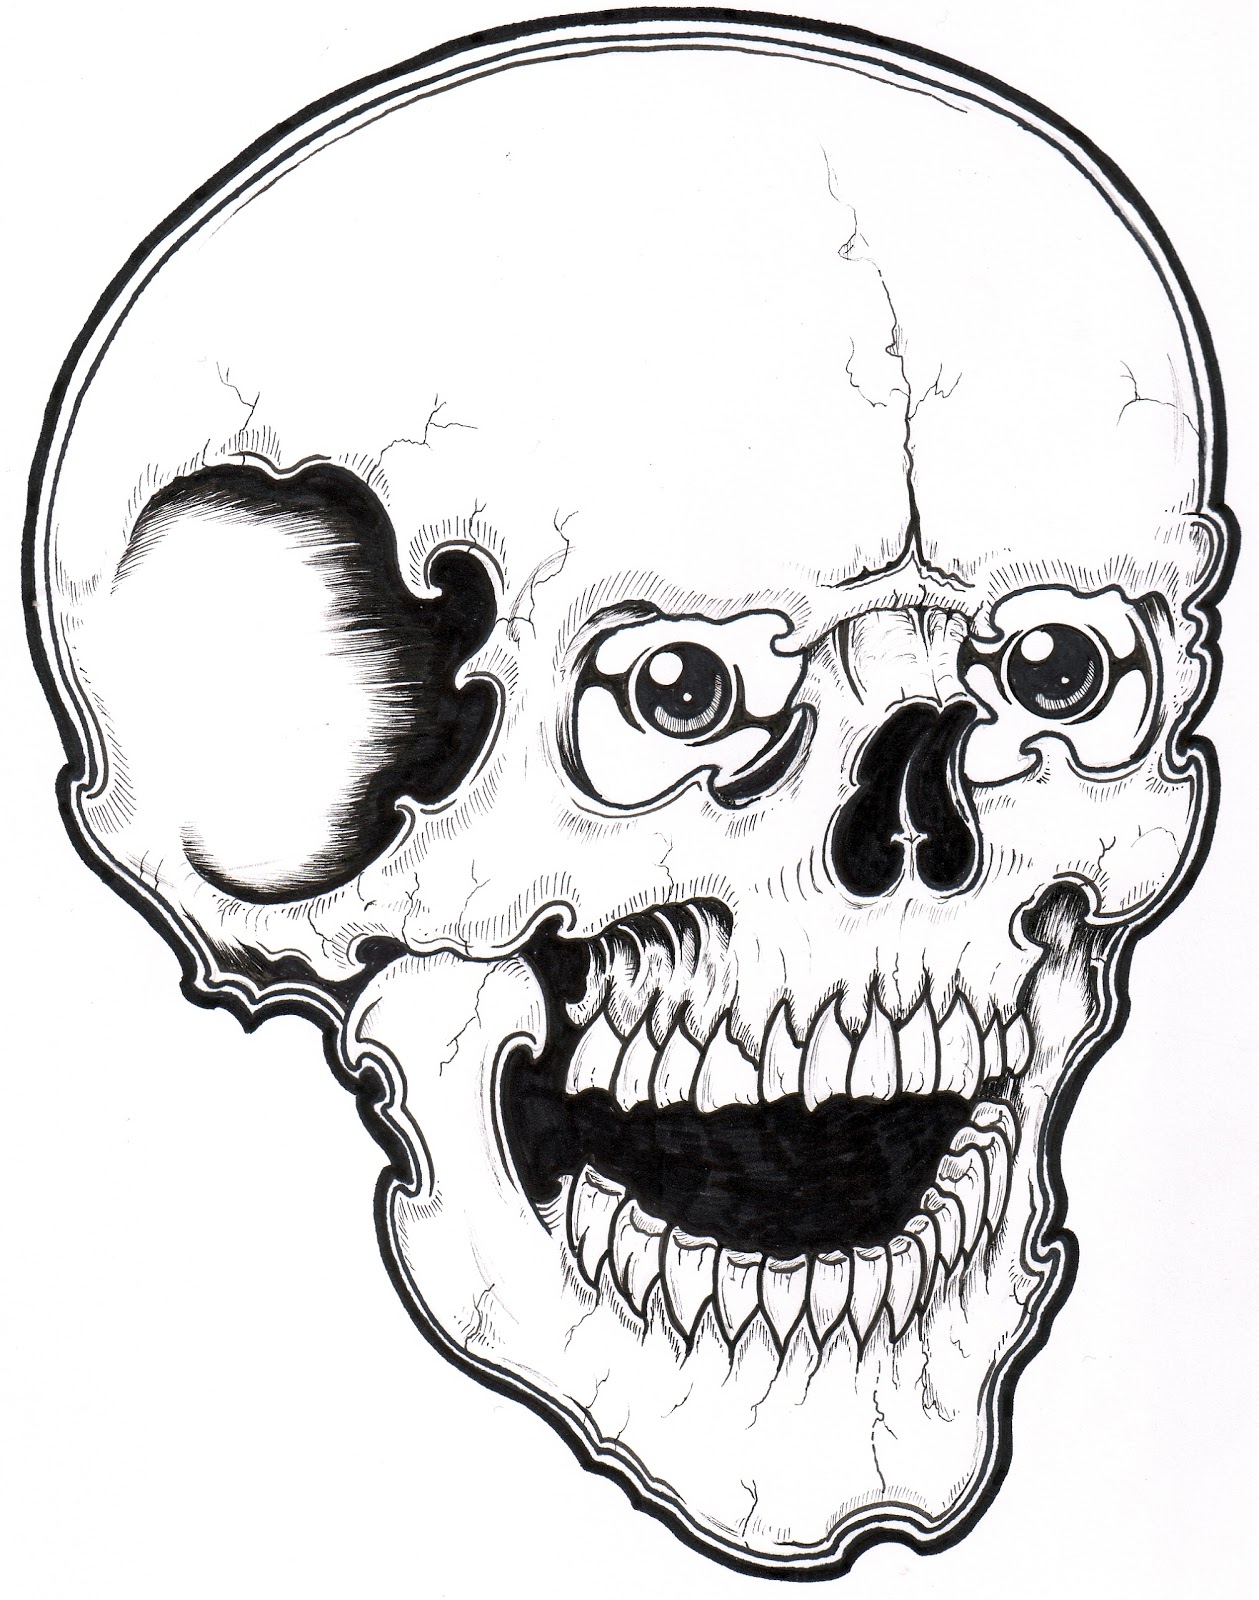 Skulls Fantasy Coloring Pages Effy Moom Free Coloring Picture wallpaper give a chance to color on the wall without getting in trouble! Fill the walls of your home or office with stress-relieving [effymoom.blogspot.com]